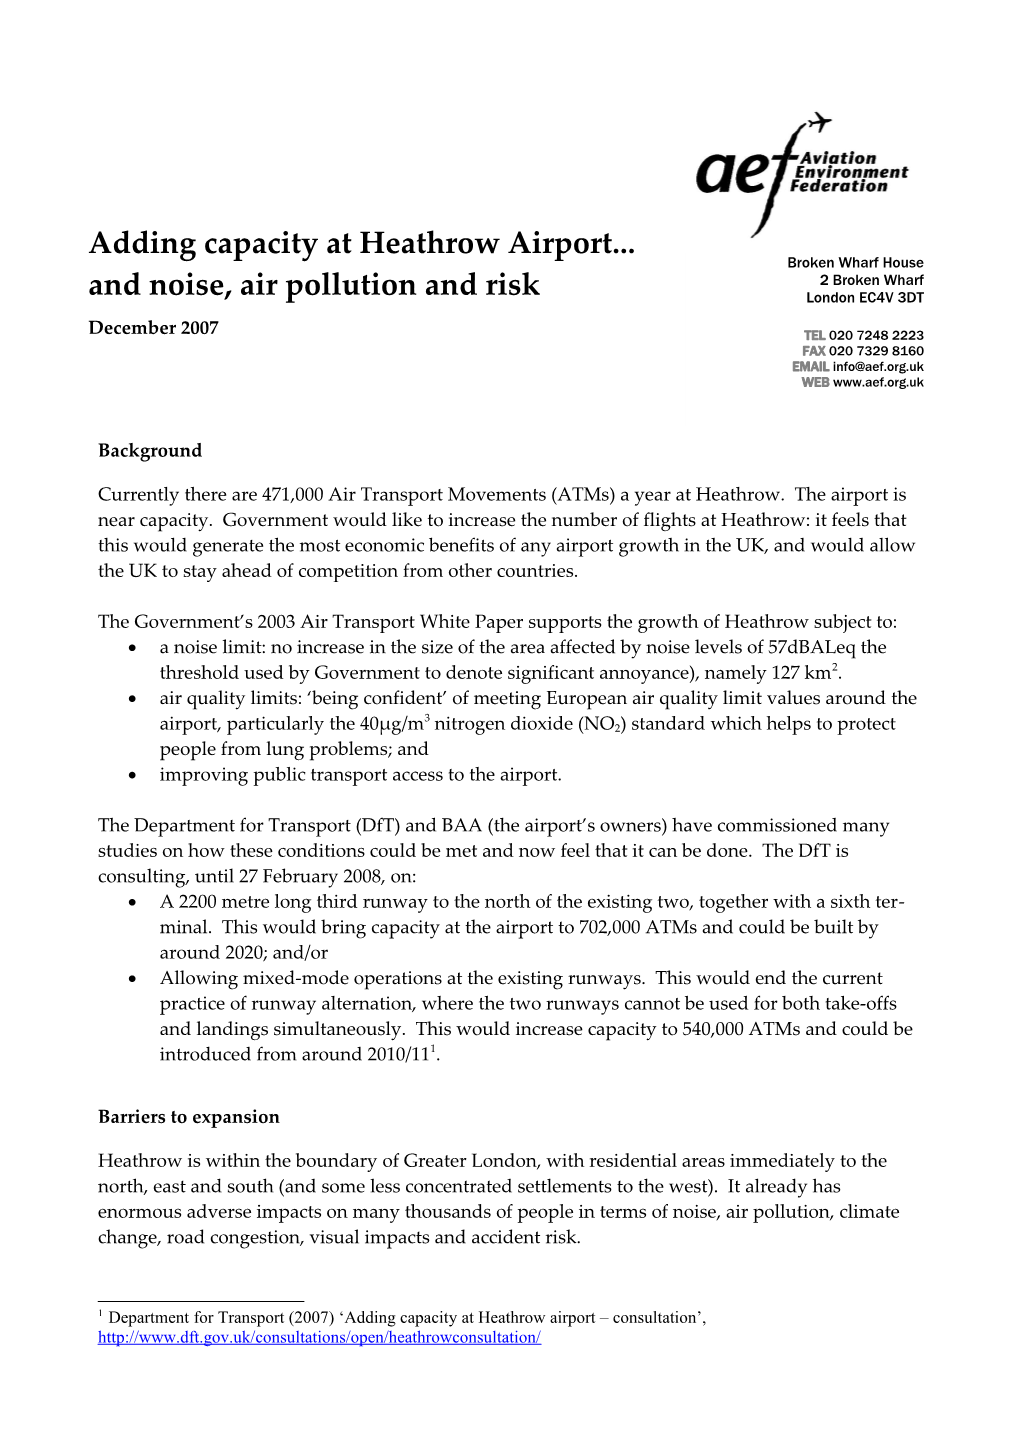 The Government S 2003 Air Transport White Paper Supports the Growth of Heathrow Subject To